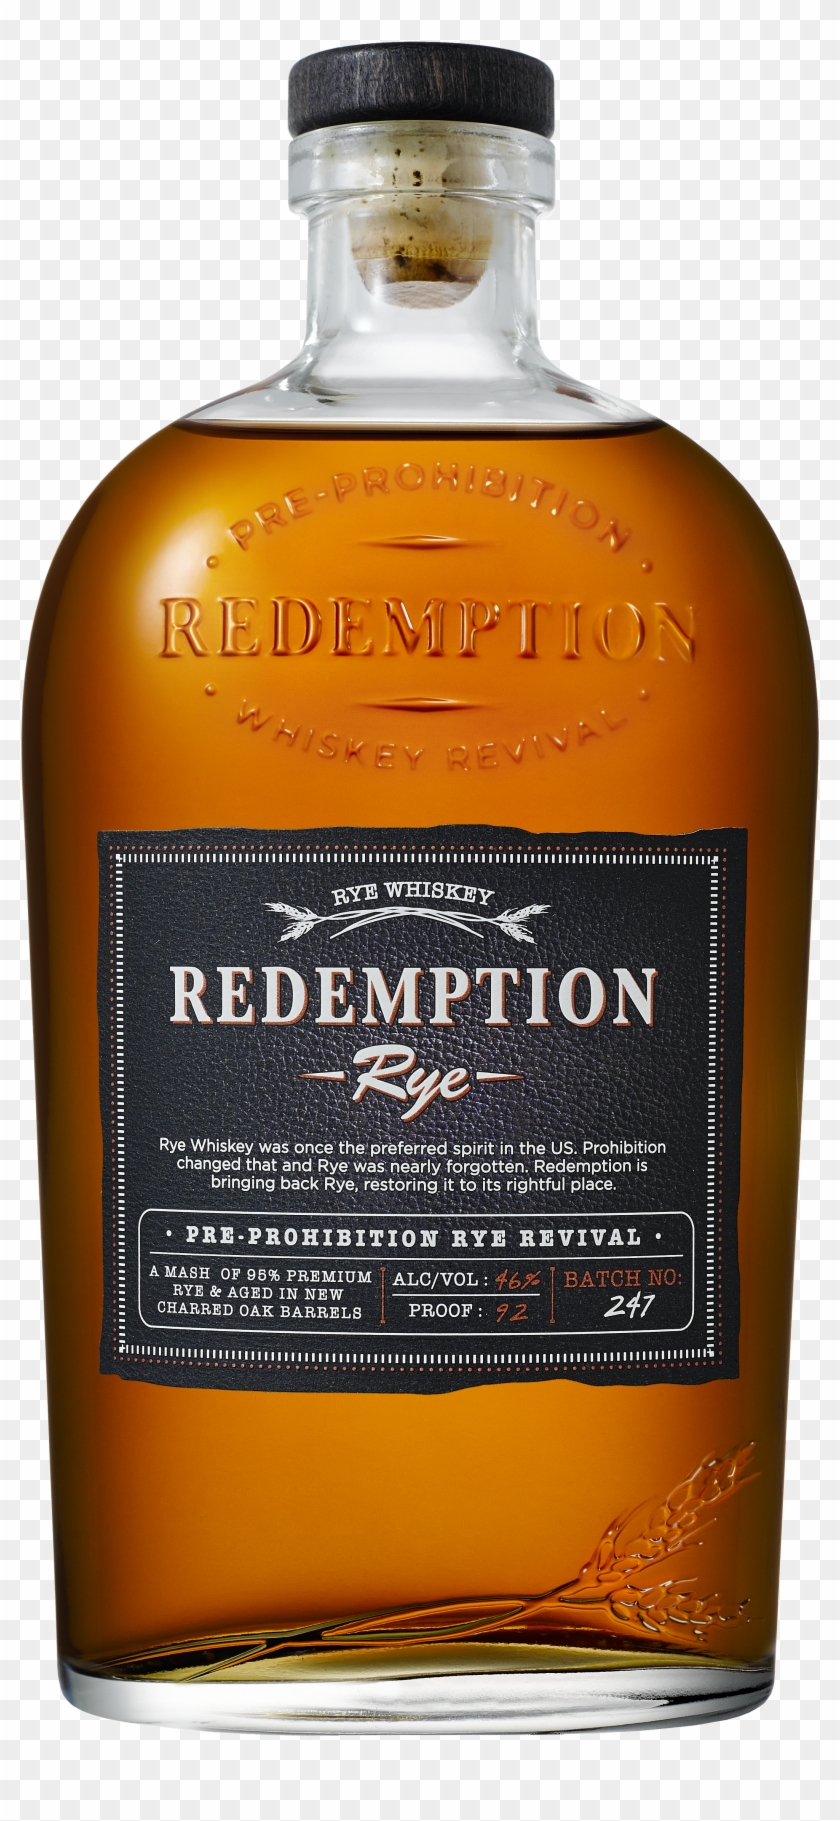 Redemption Whiskey Product Photos - Redemption Bourbon Whiskey Label Clipart #2274708